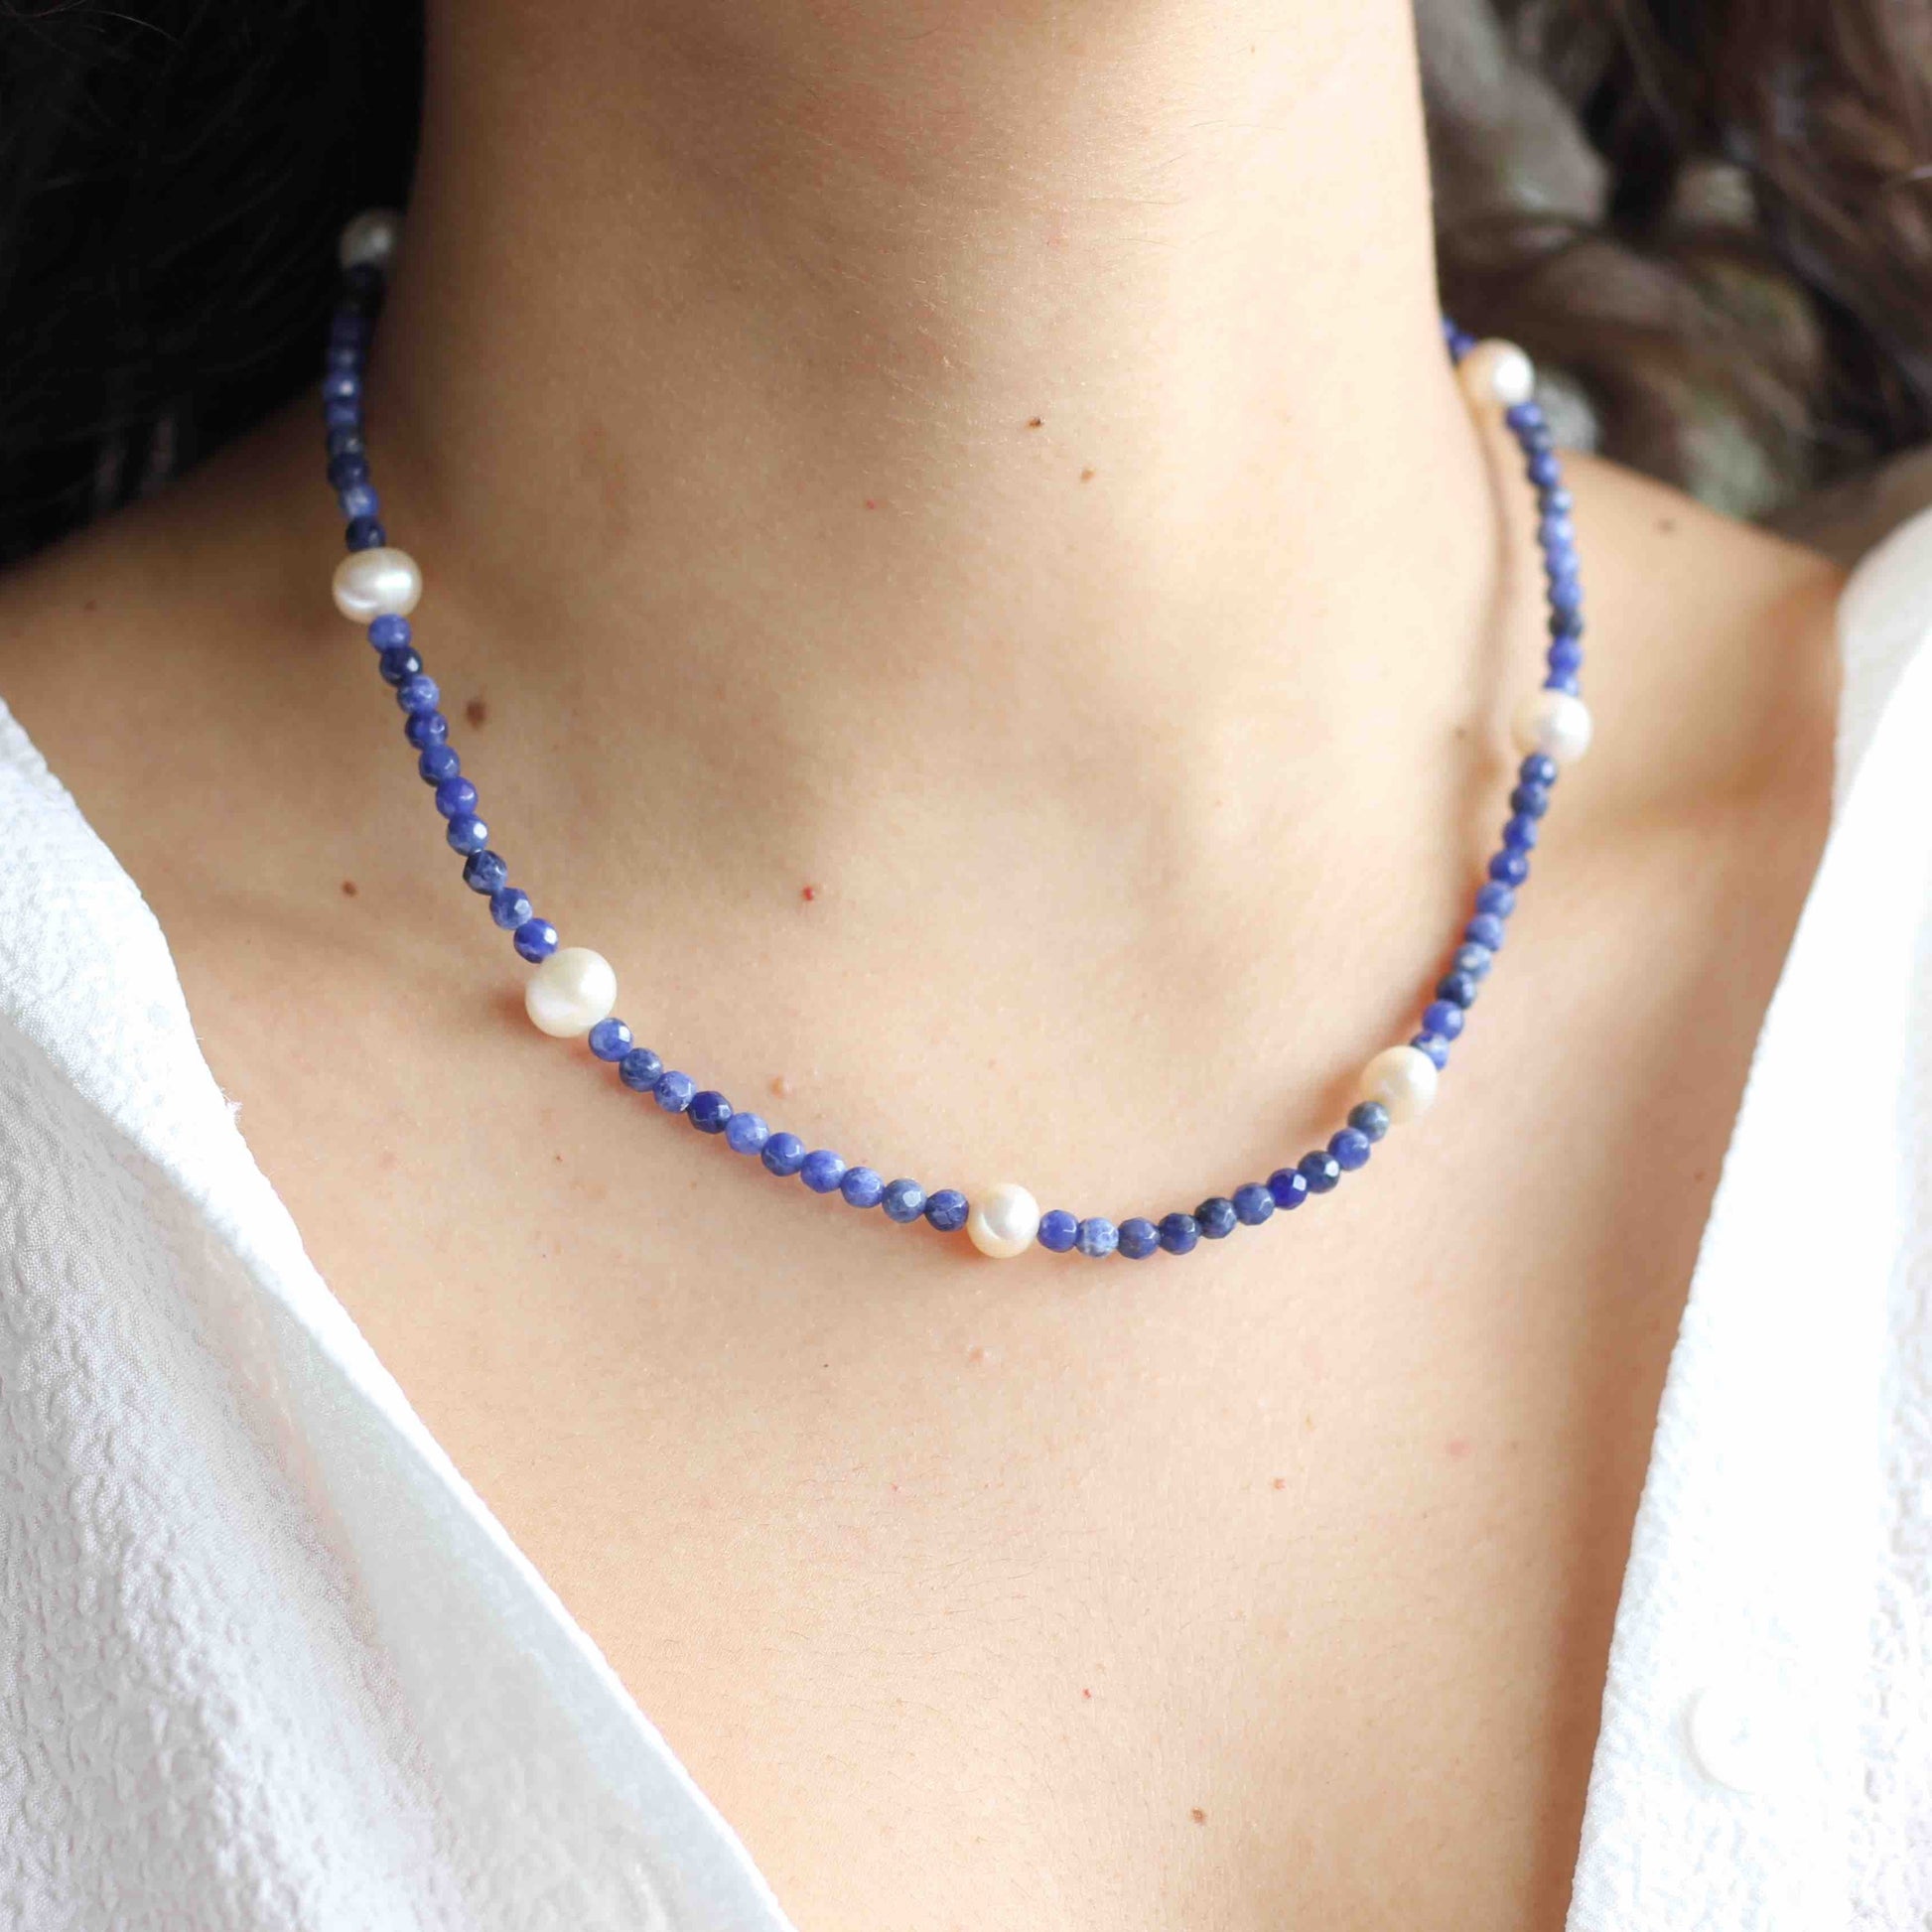 Sodalite Pearl Necklace, Pearl Necklace, Sodalite Necklace, Gemstone Necklace, Necklace for Women, Sodalite Meaning, Sodalite Crystal